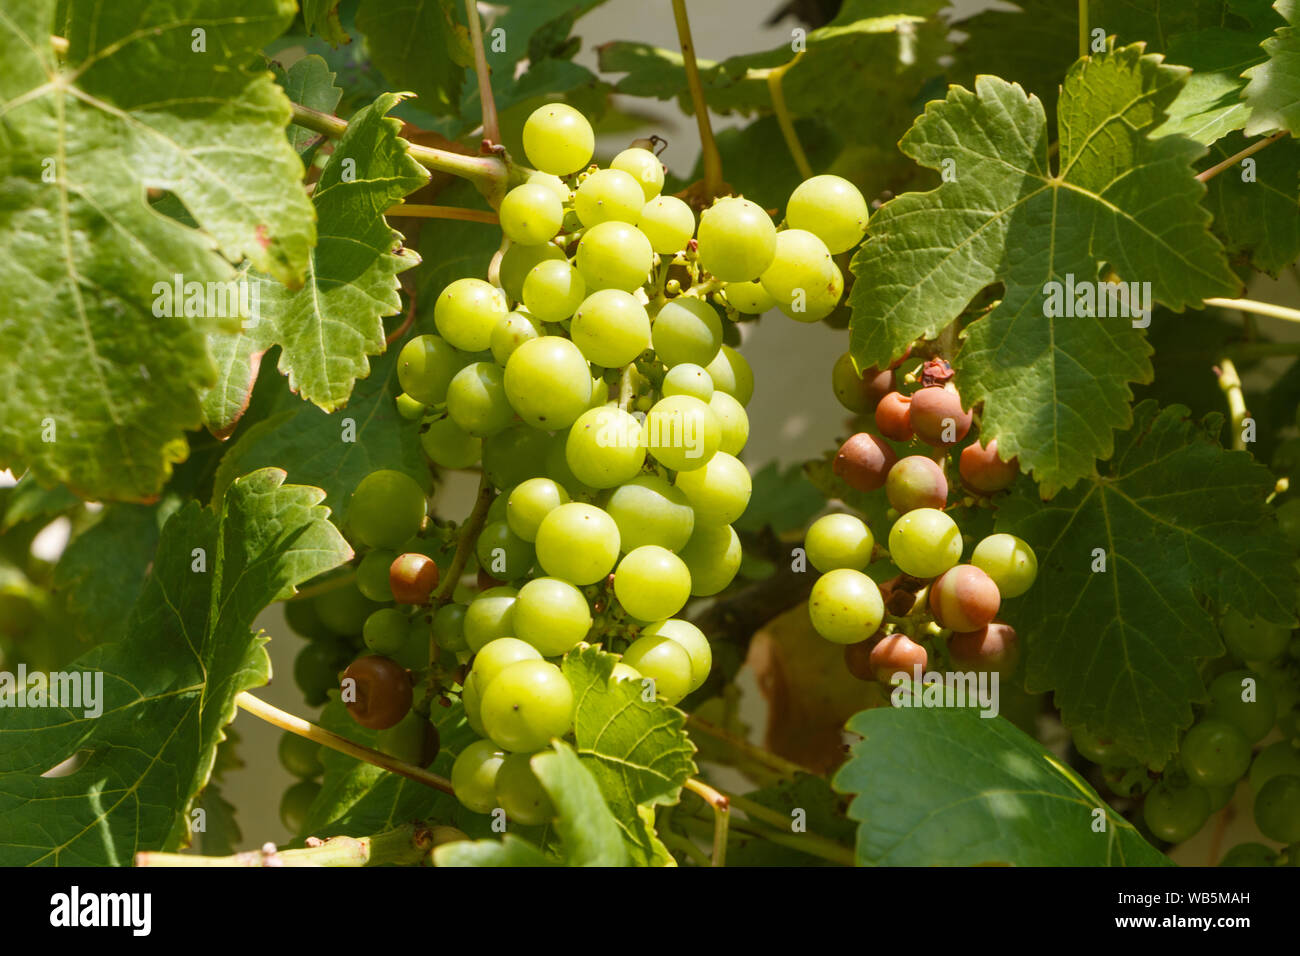 Bunch of grapes with some rotten on vine stock during summer Stock Photo